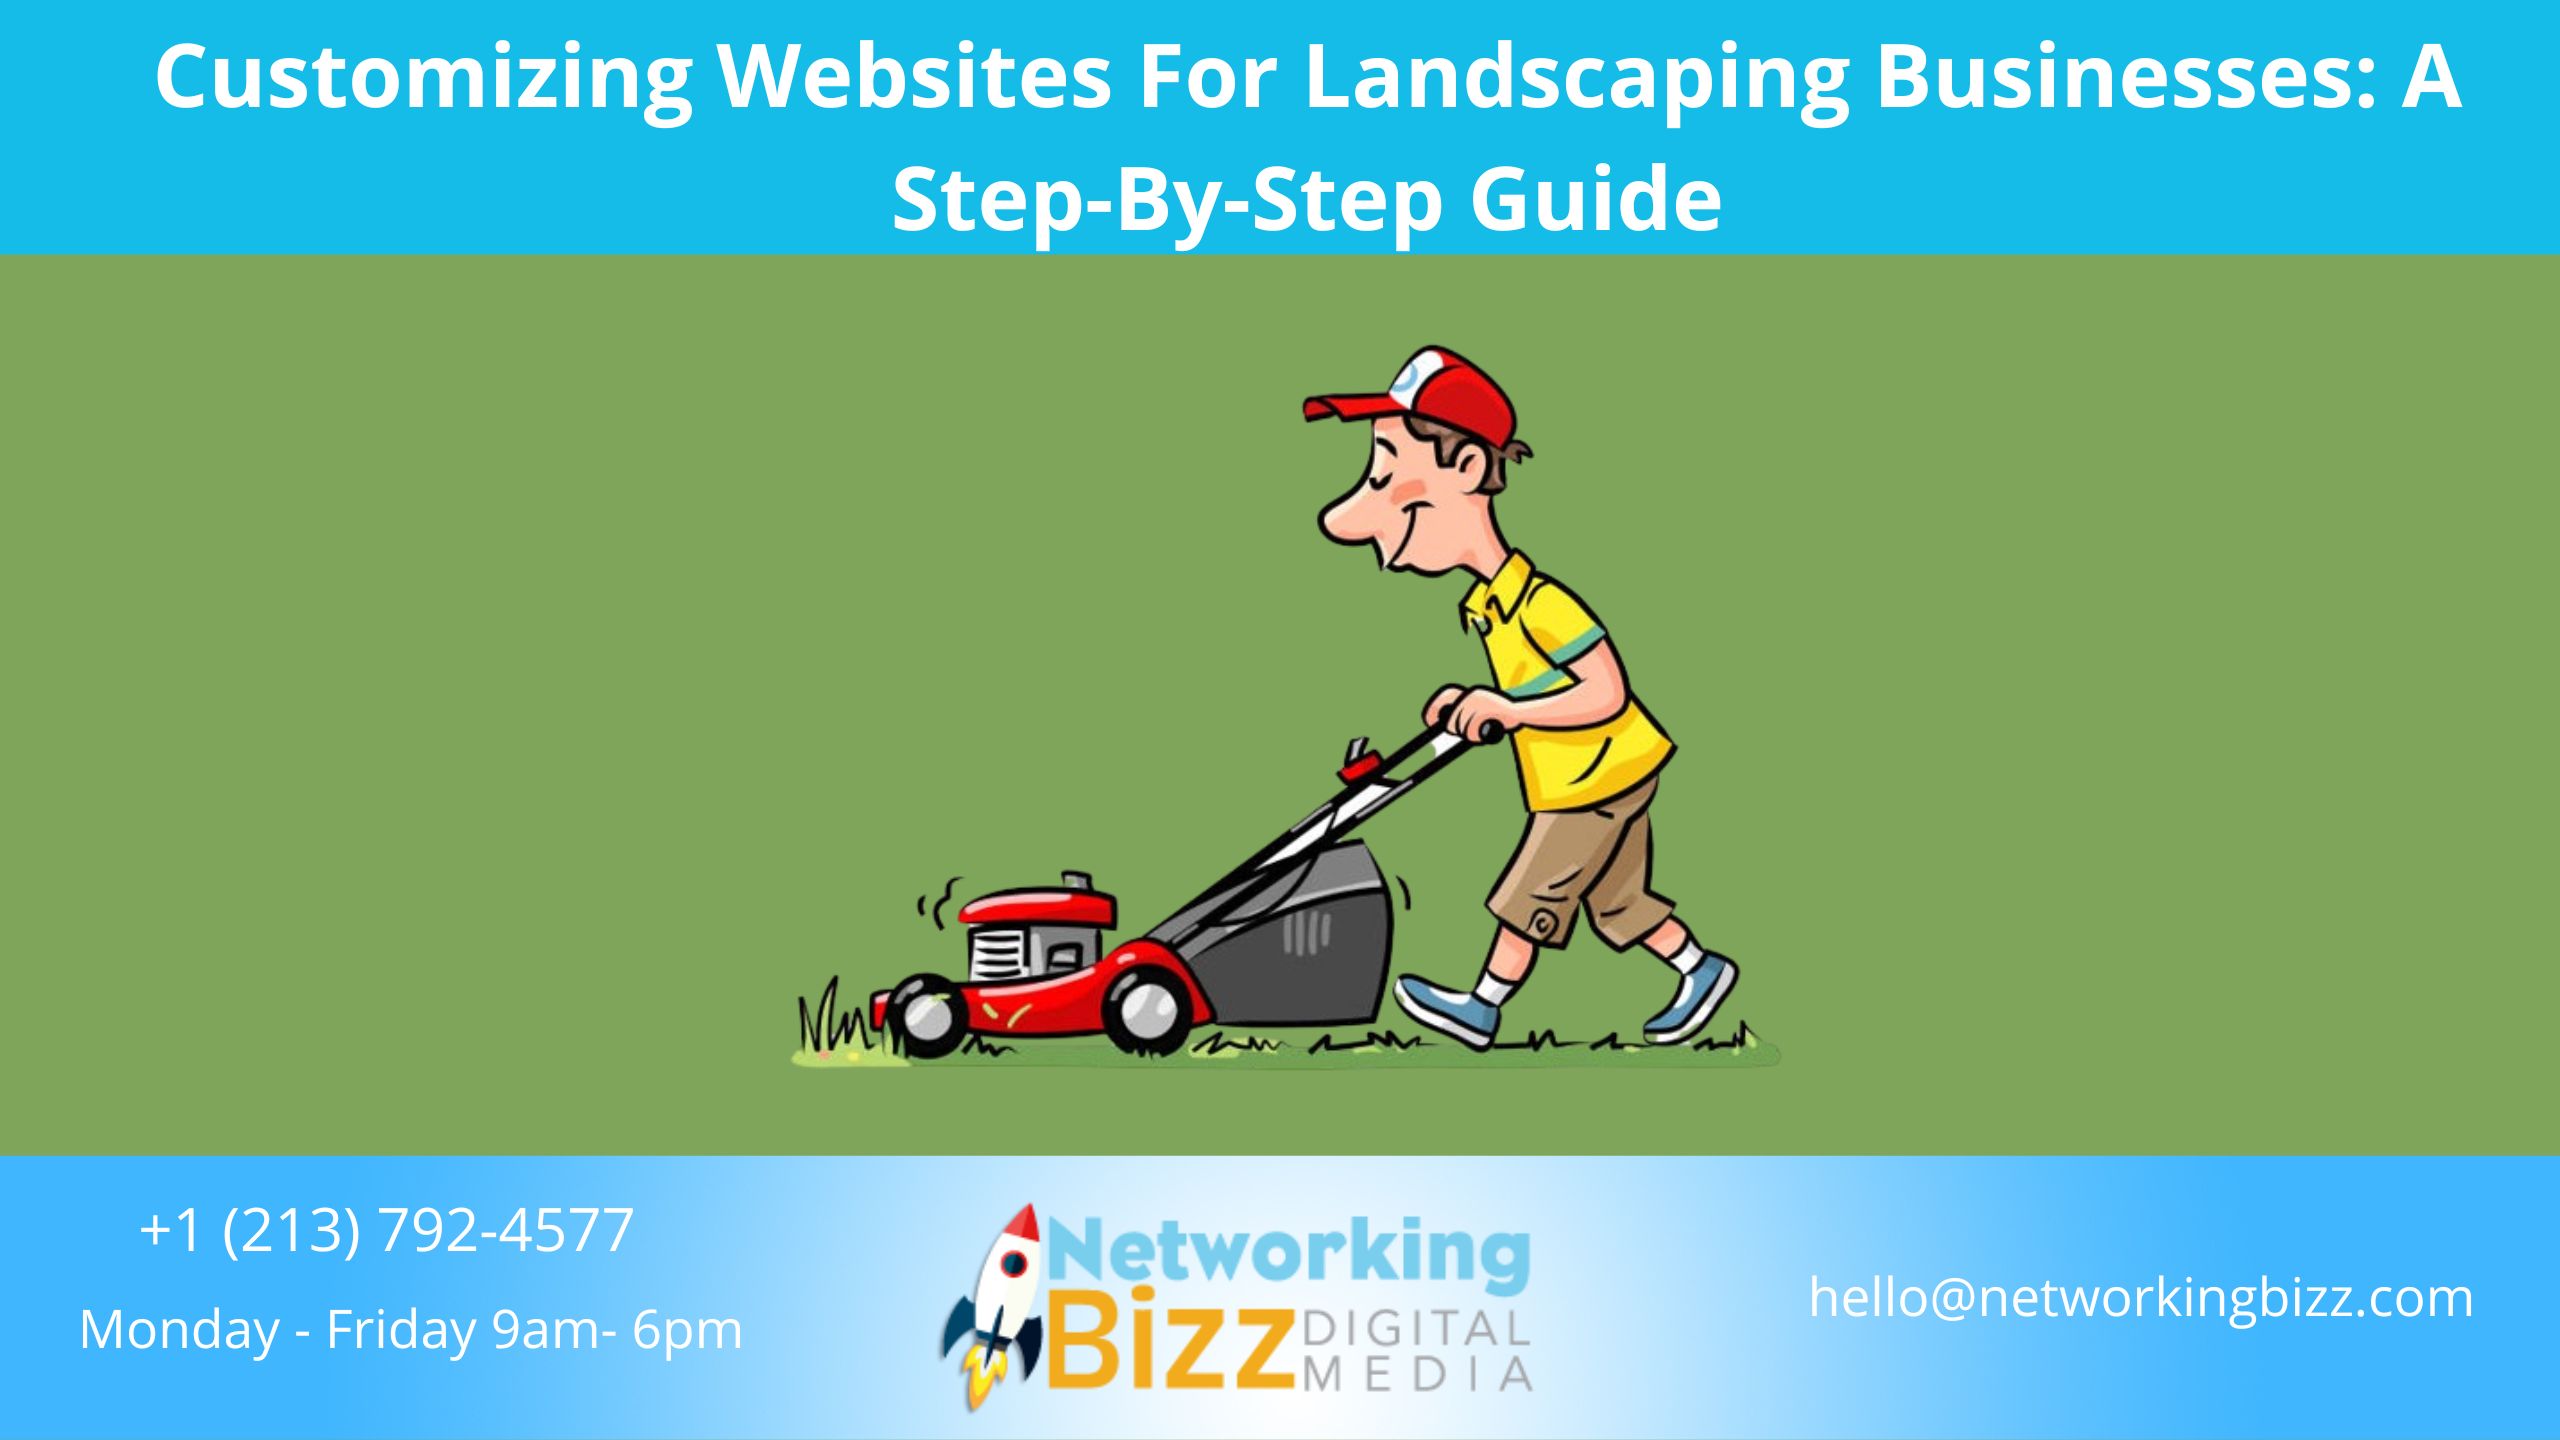 Customizing Websites For Landscaping Businesses: A Step-By-Step Guide